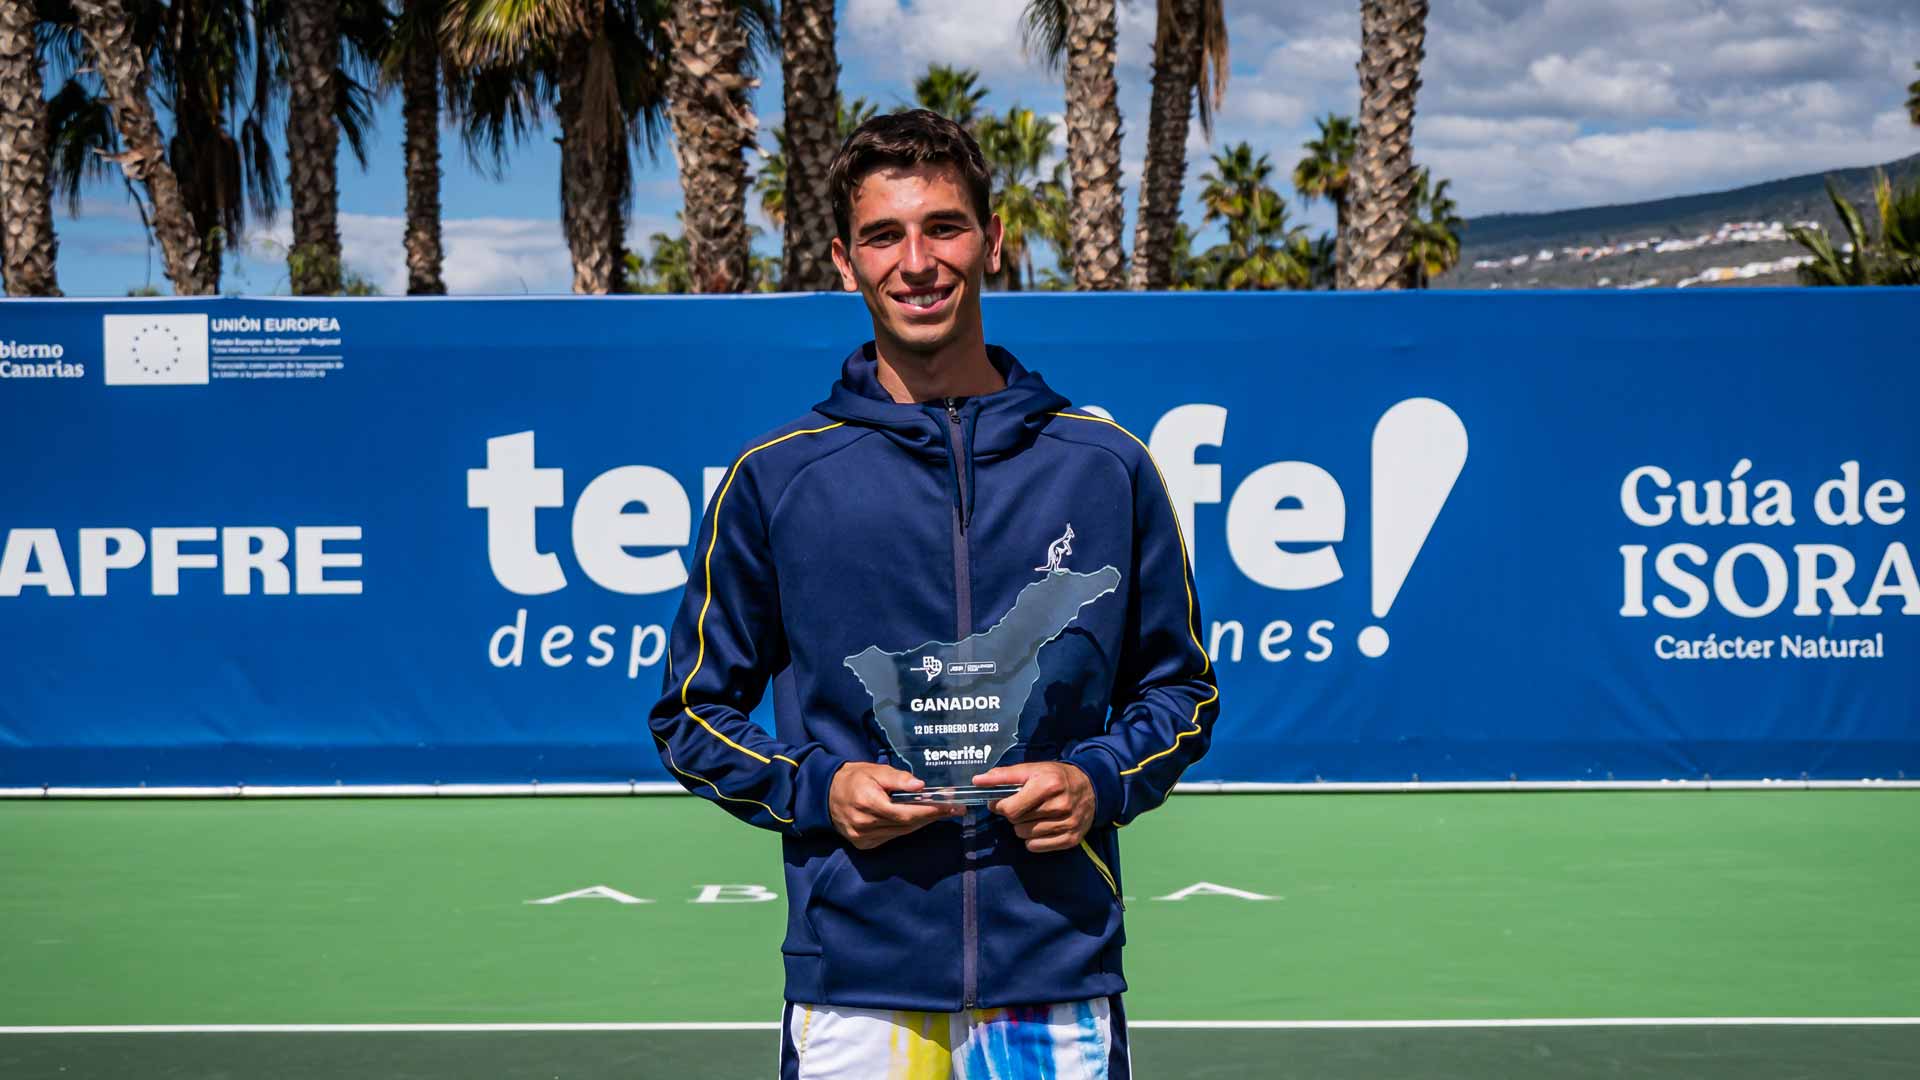 Matteo Gigante claims the Challenger 75 event in Tenerife.